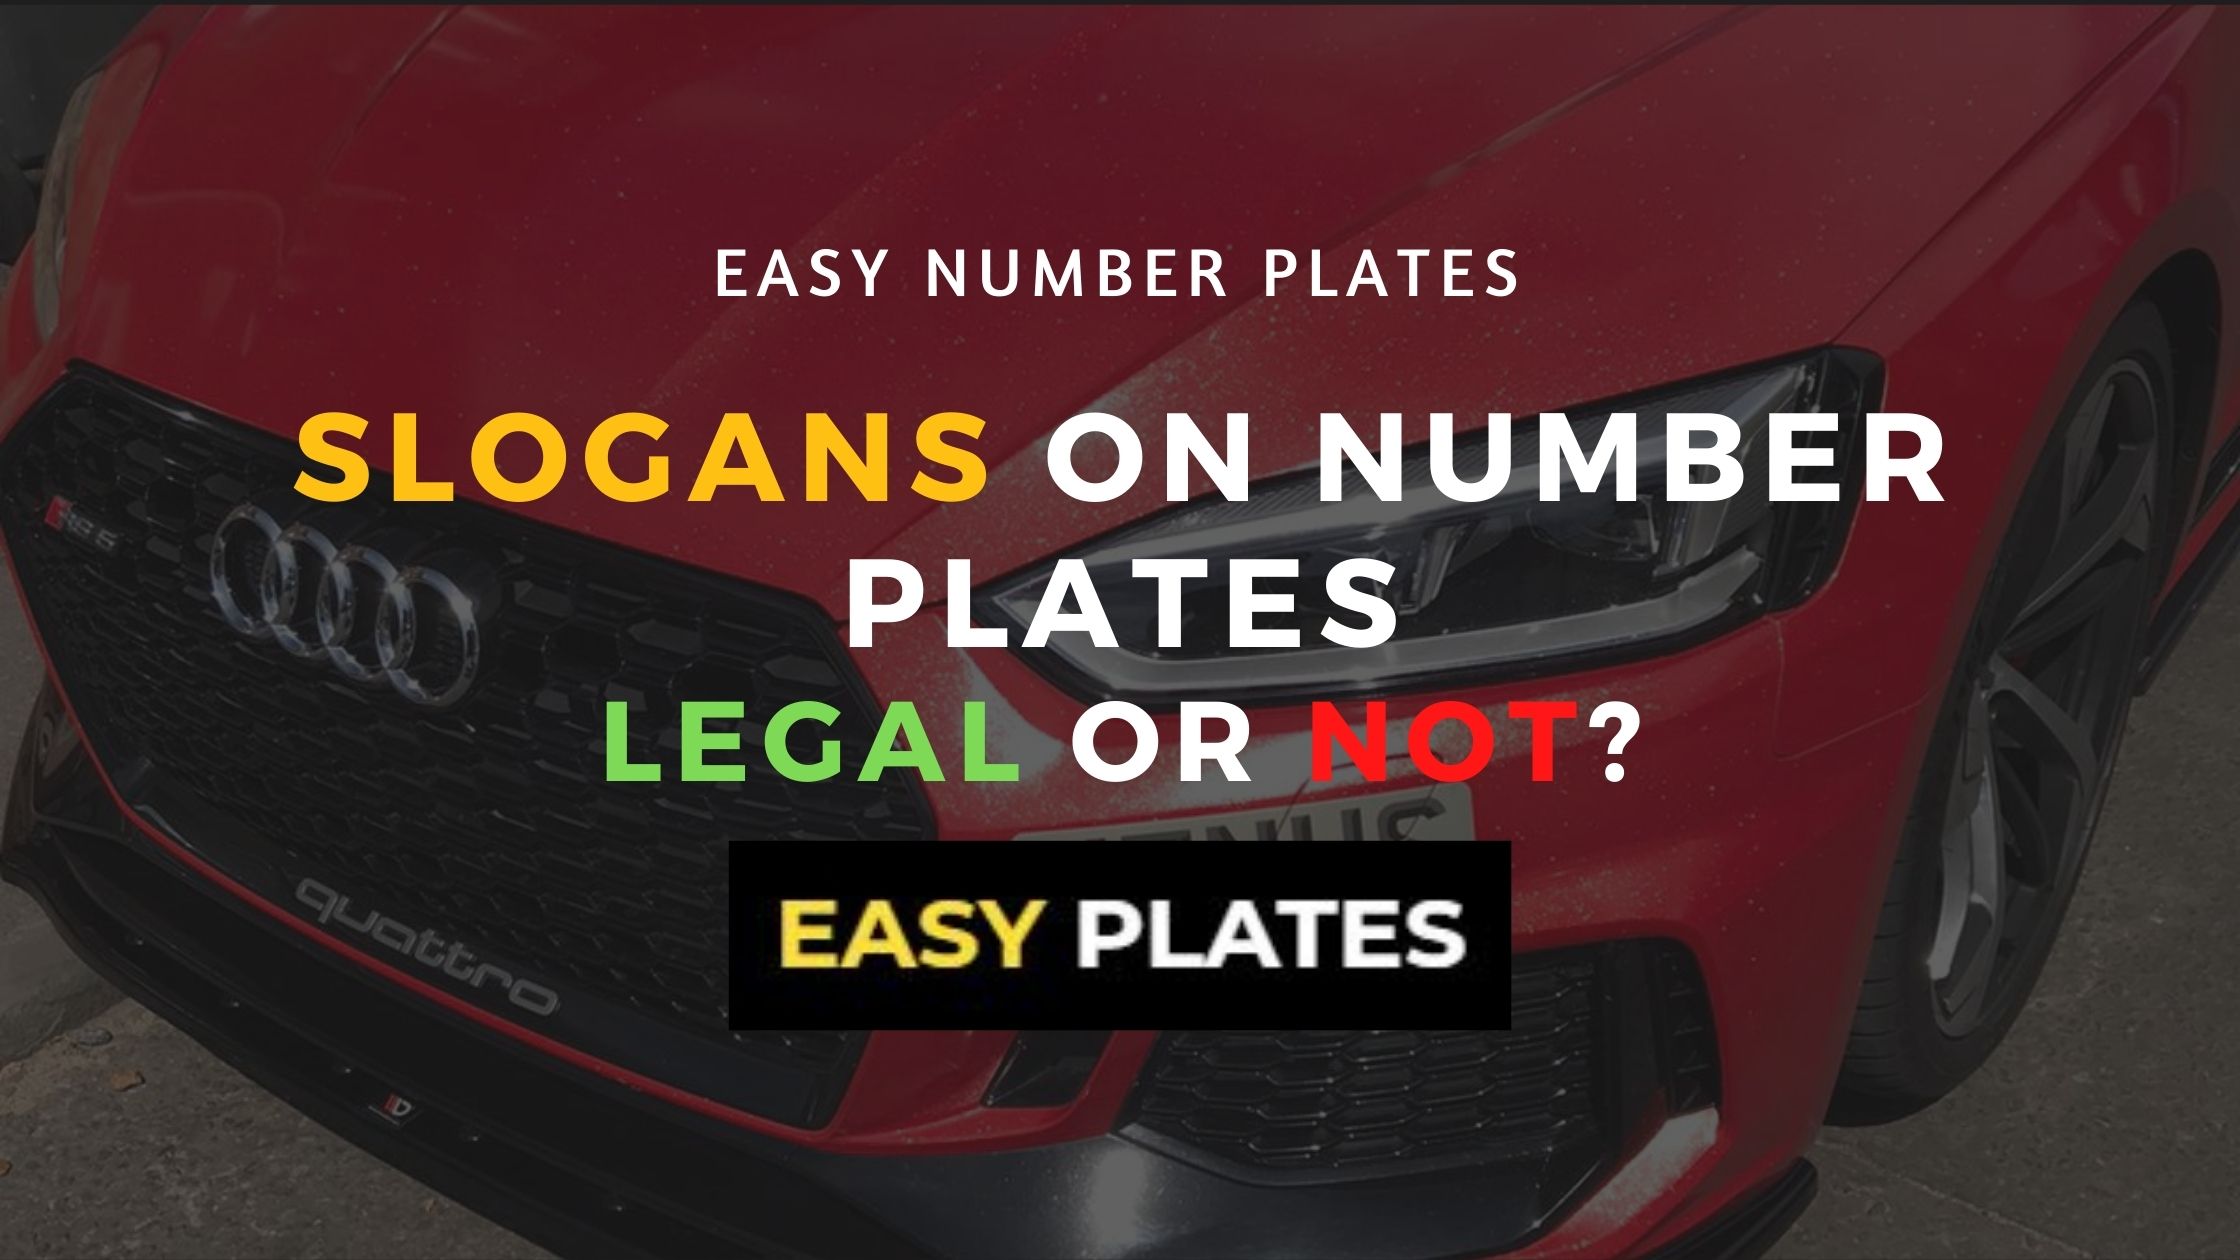 Slogans On Number Plates: Legal or Not?